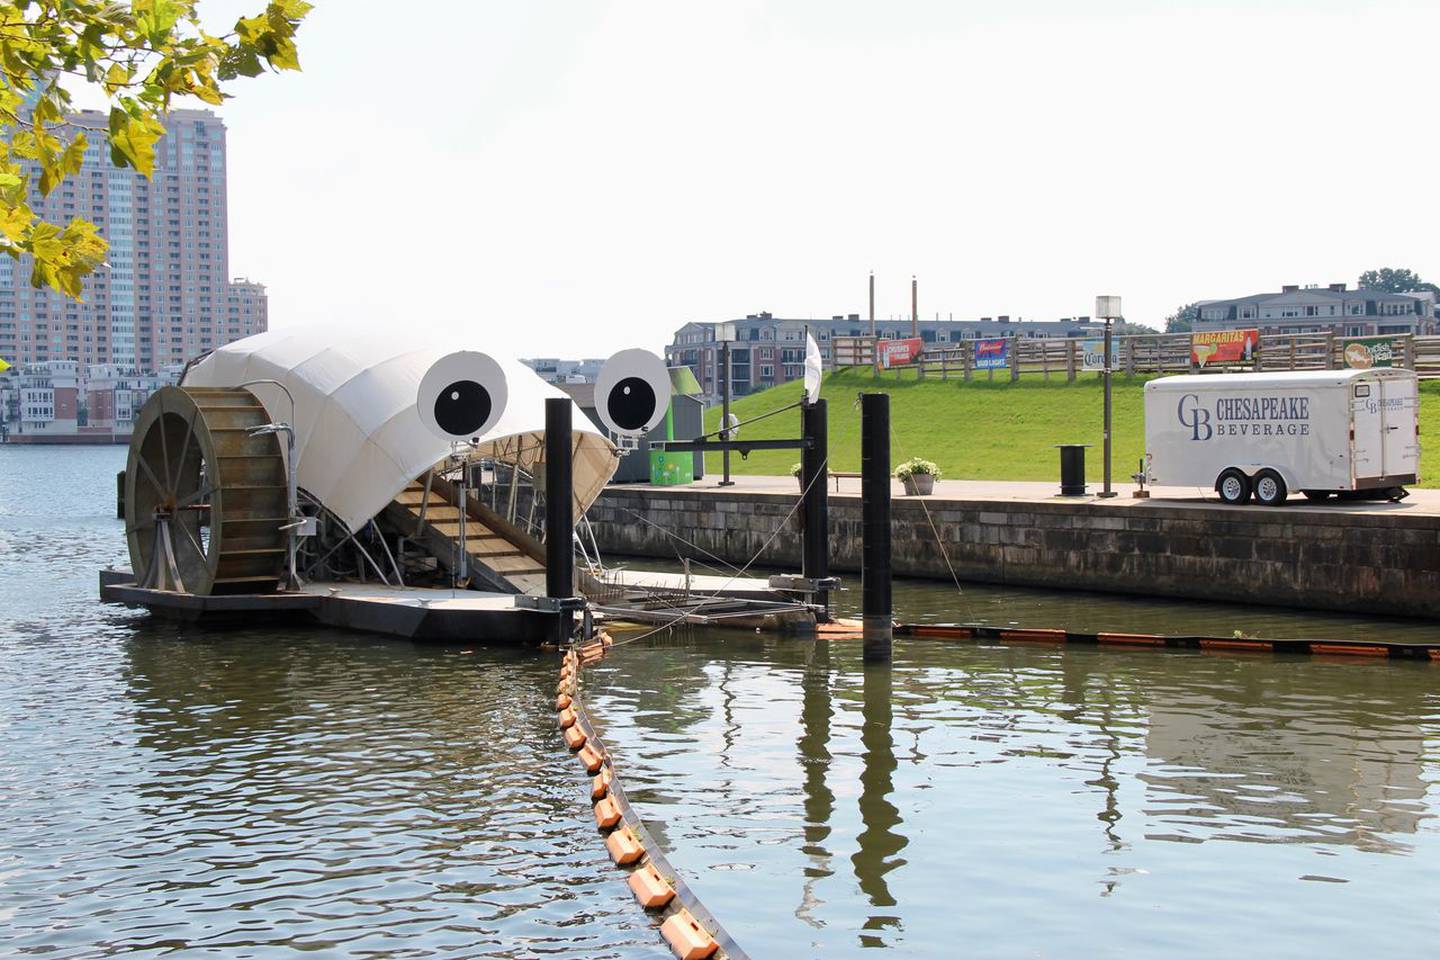 Mr. Trash Wheel sits in the water at the mouth of the Jones Falls on a sunny day.